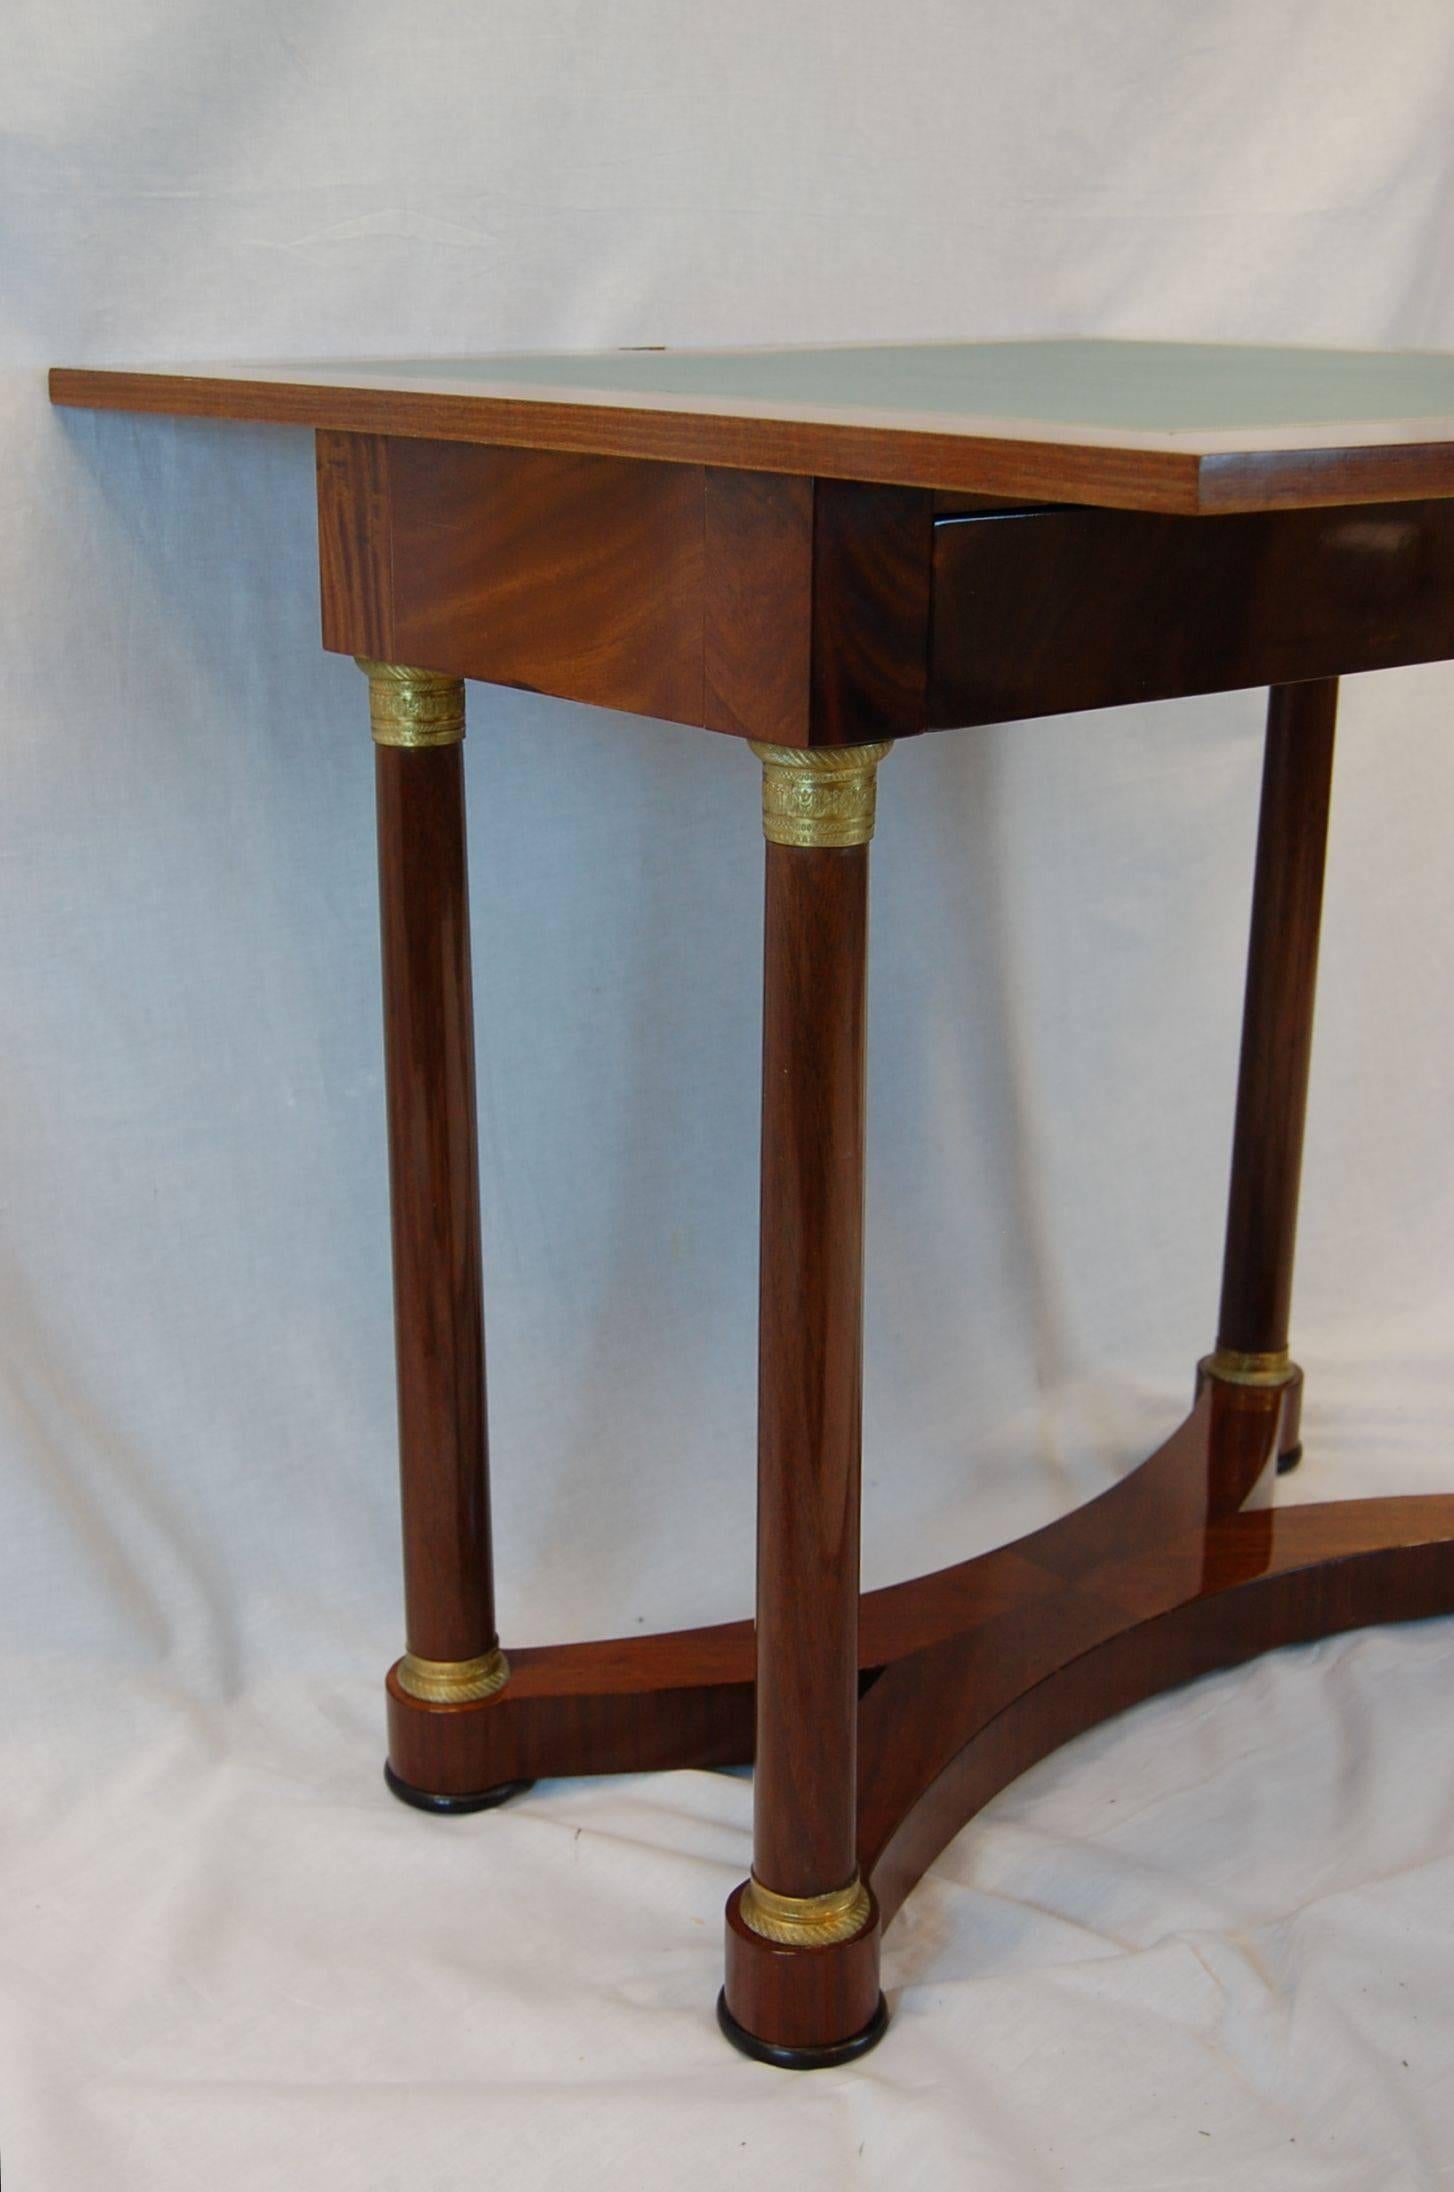 Empire Mahogany Flip-Top Card Table with Leather Insert, circa 1880